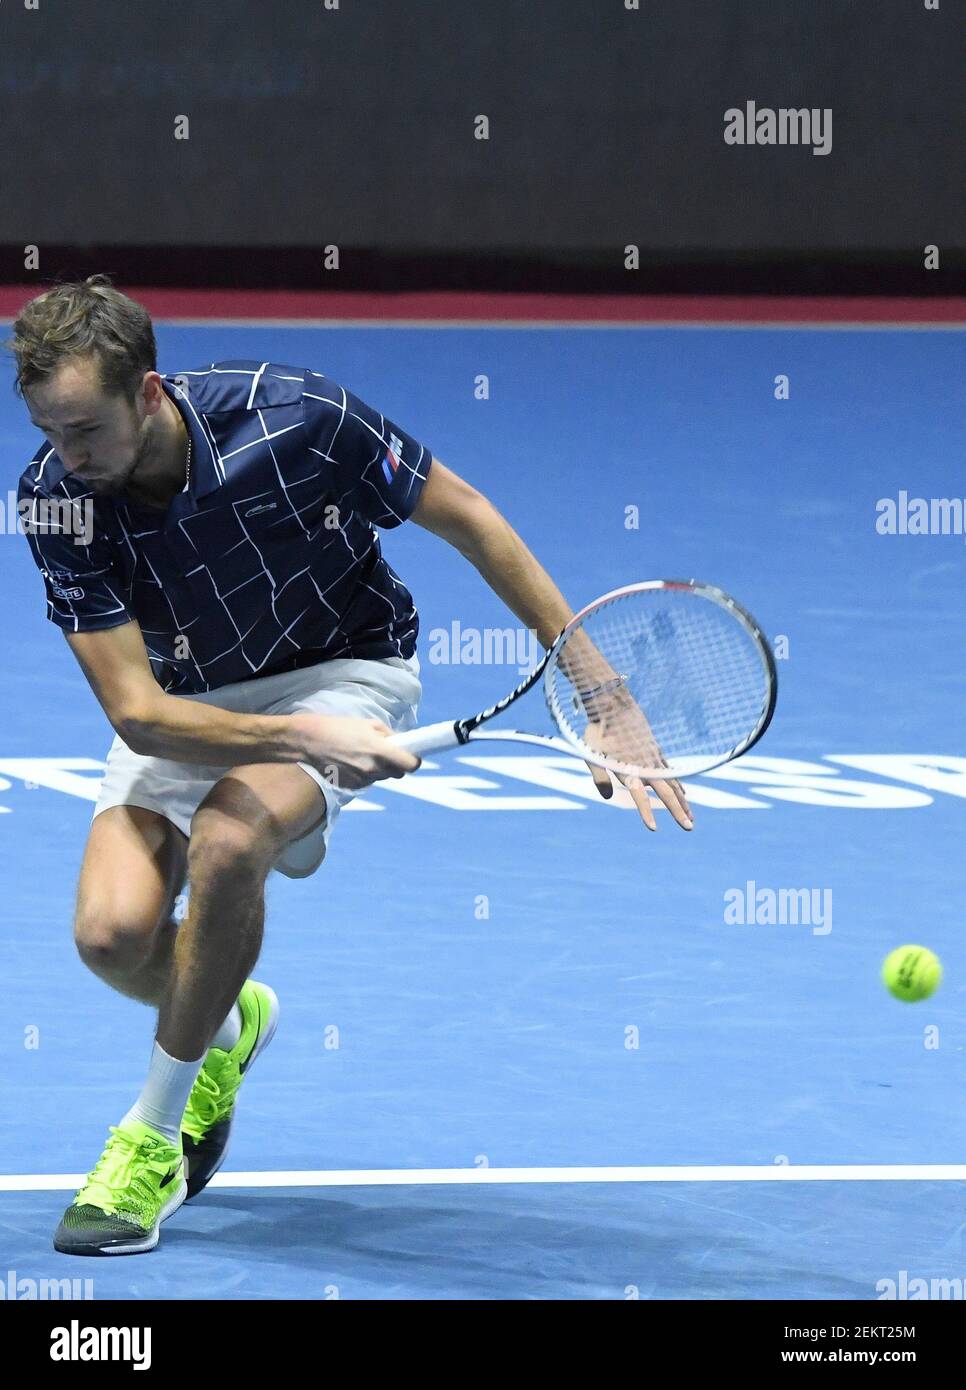 Xxv International Tennis Tournament Atp St Petersburg Open 2020 At The Sports Complex Sibur Arena Russian Tennis Player Daniil Medvedev During A Match With American Tennis Player Reilly Opelka October 16 2020